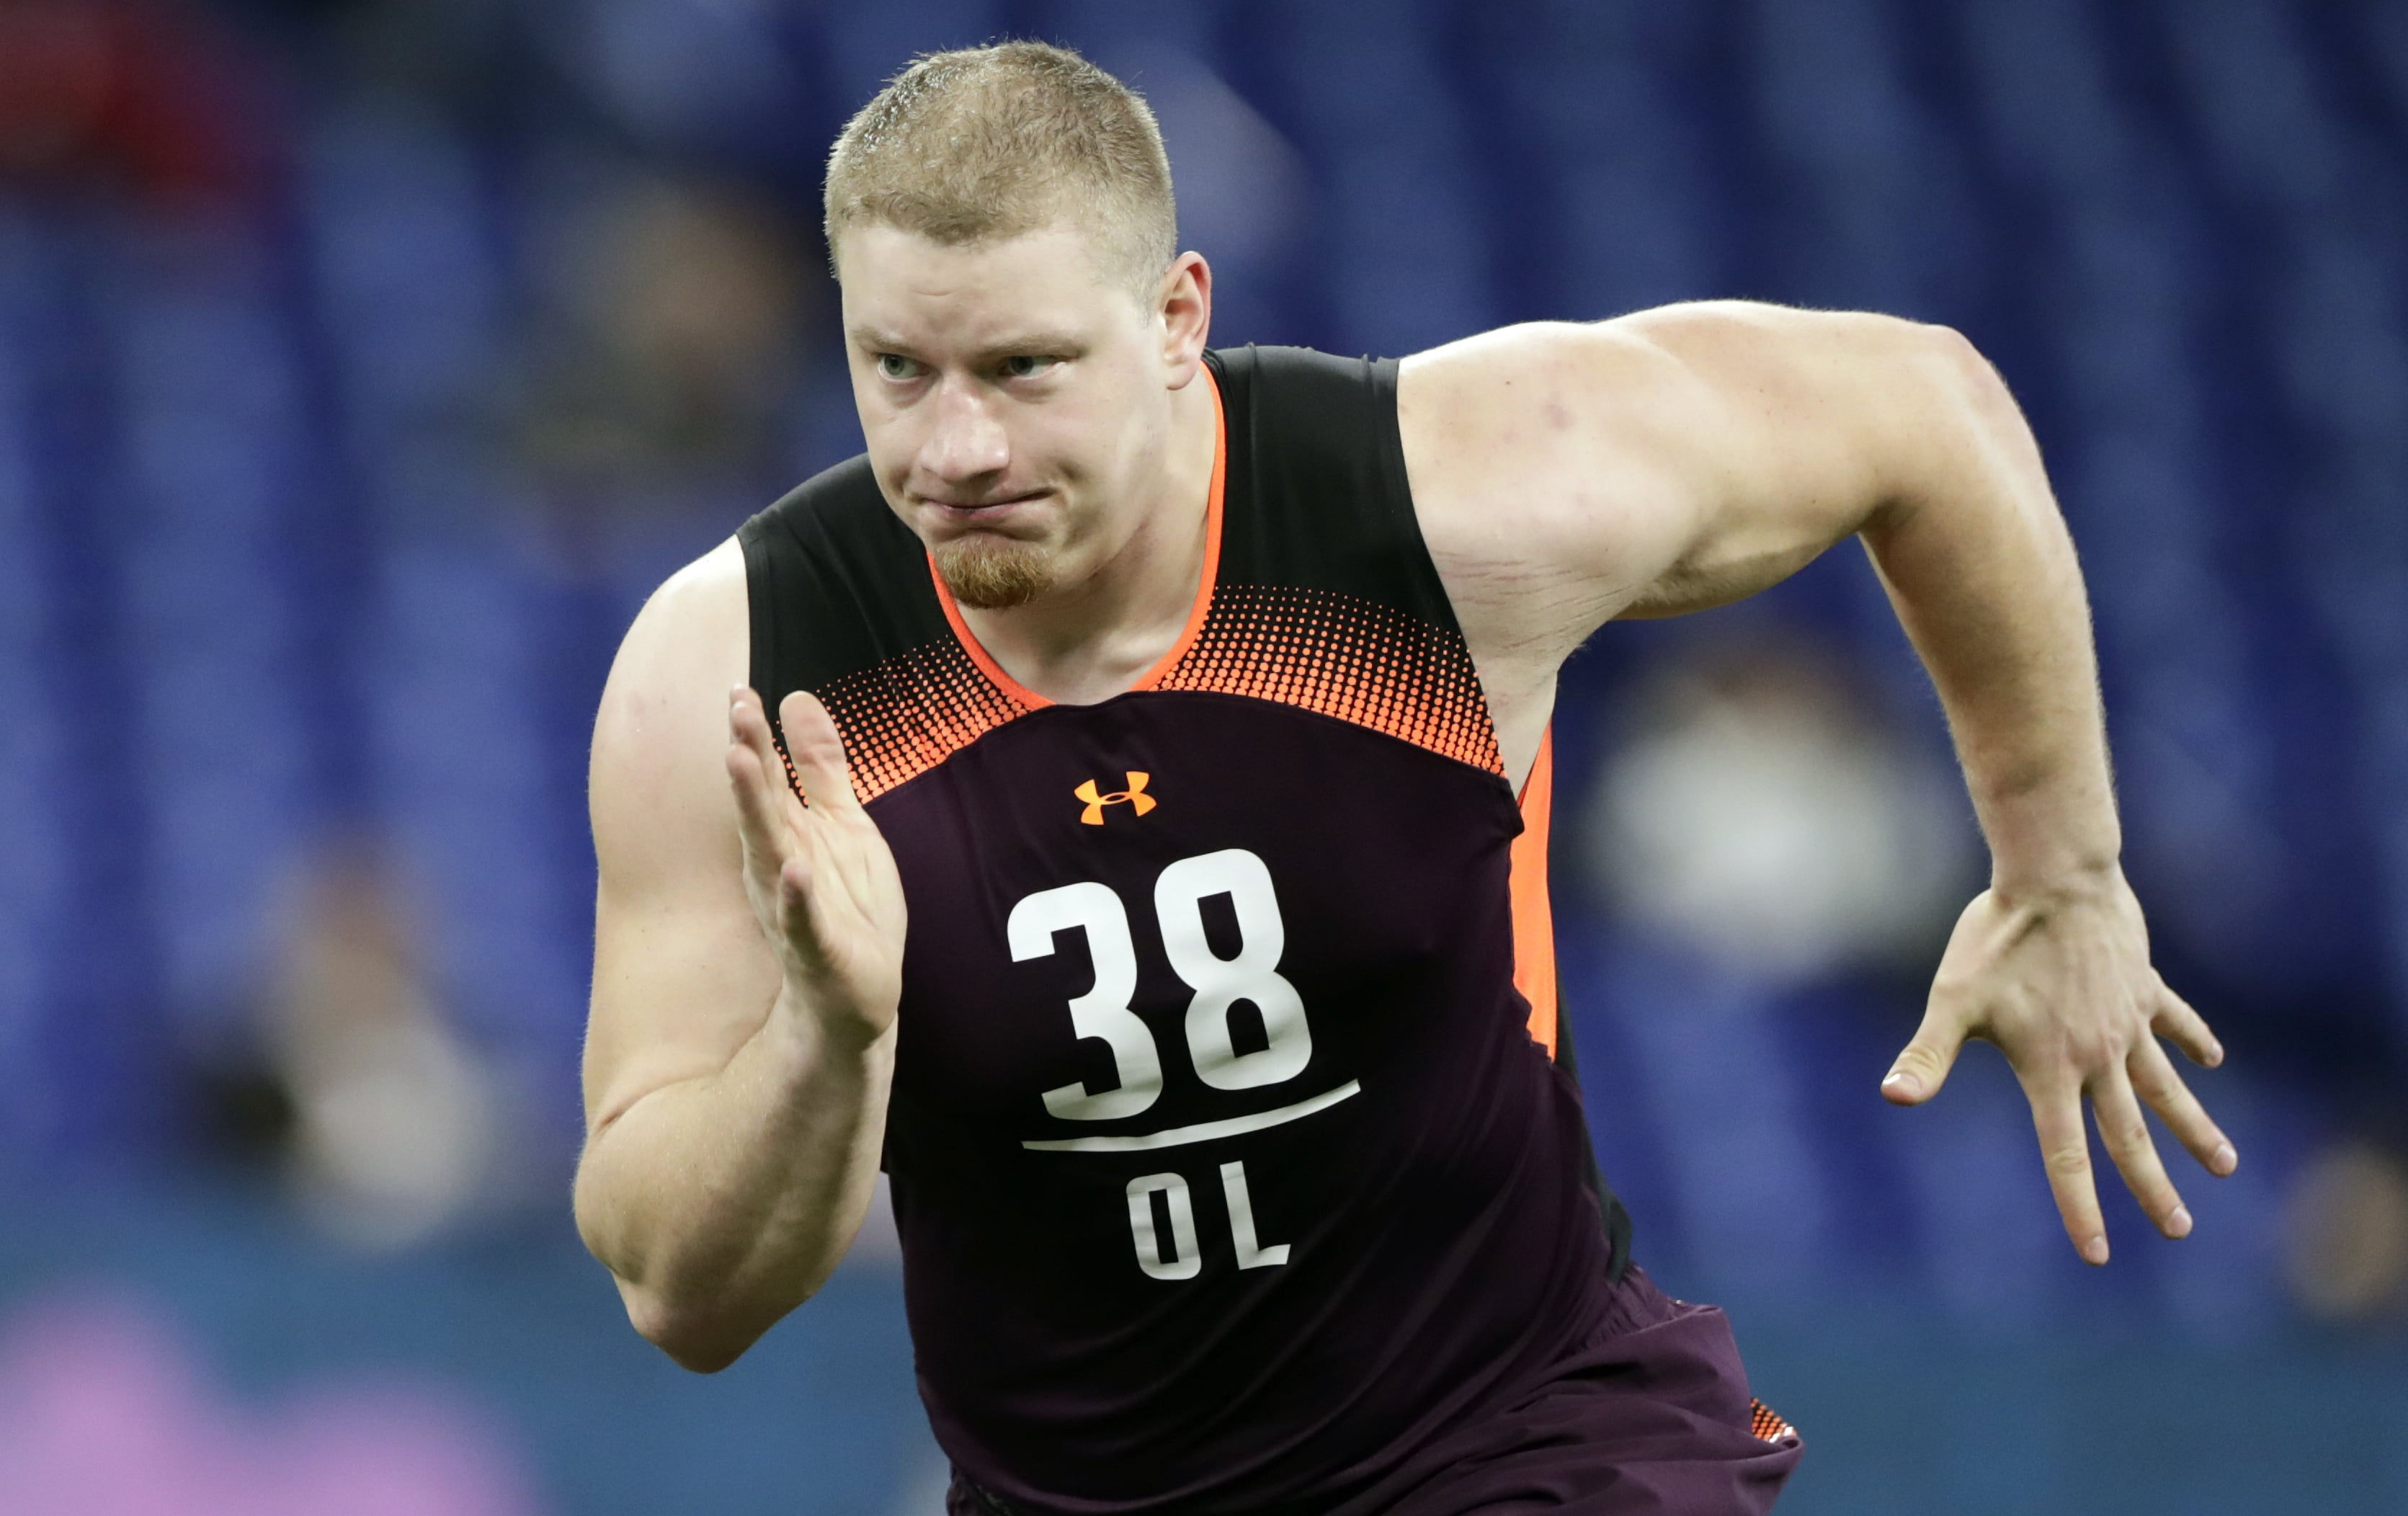 FILE - In this March 1, 2019, file photo, Washington offensive lineman Kaleb McGary runs a drill at the NFL football scouting combine in Indianapolis. McGary is a possible pick in the 2019 NFL Draft.